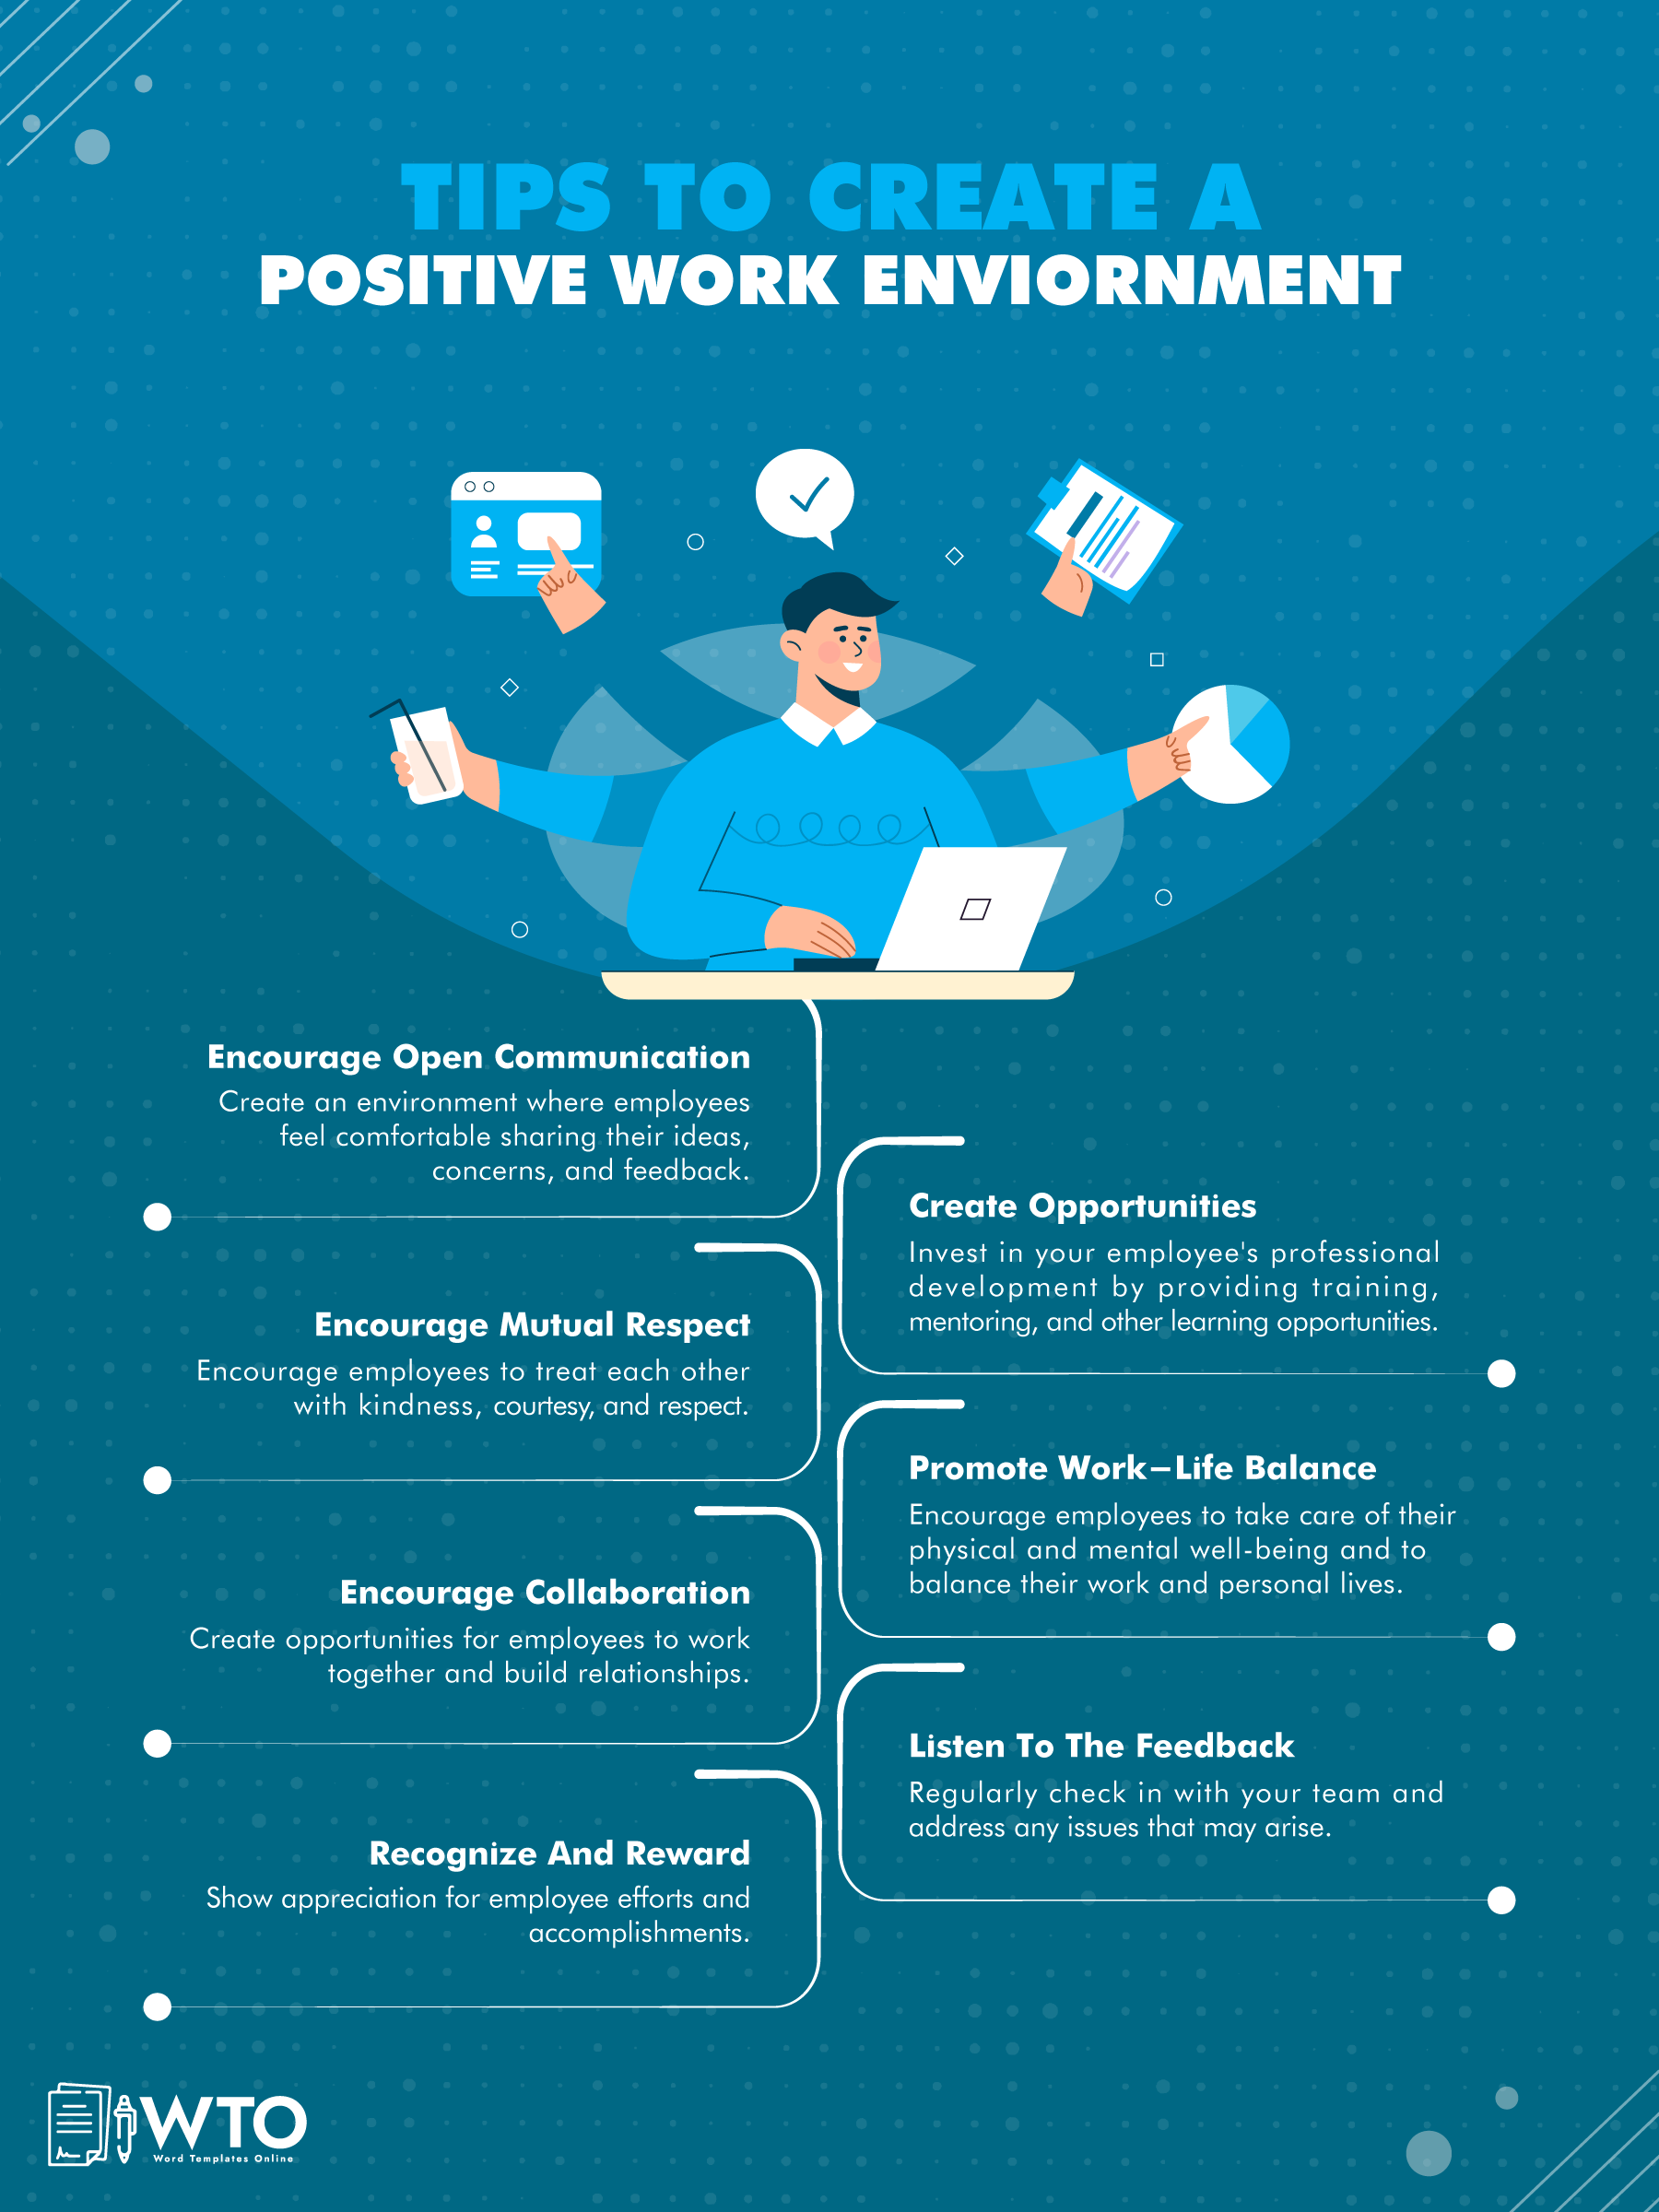 This infographic is about creating positive work environment.